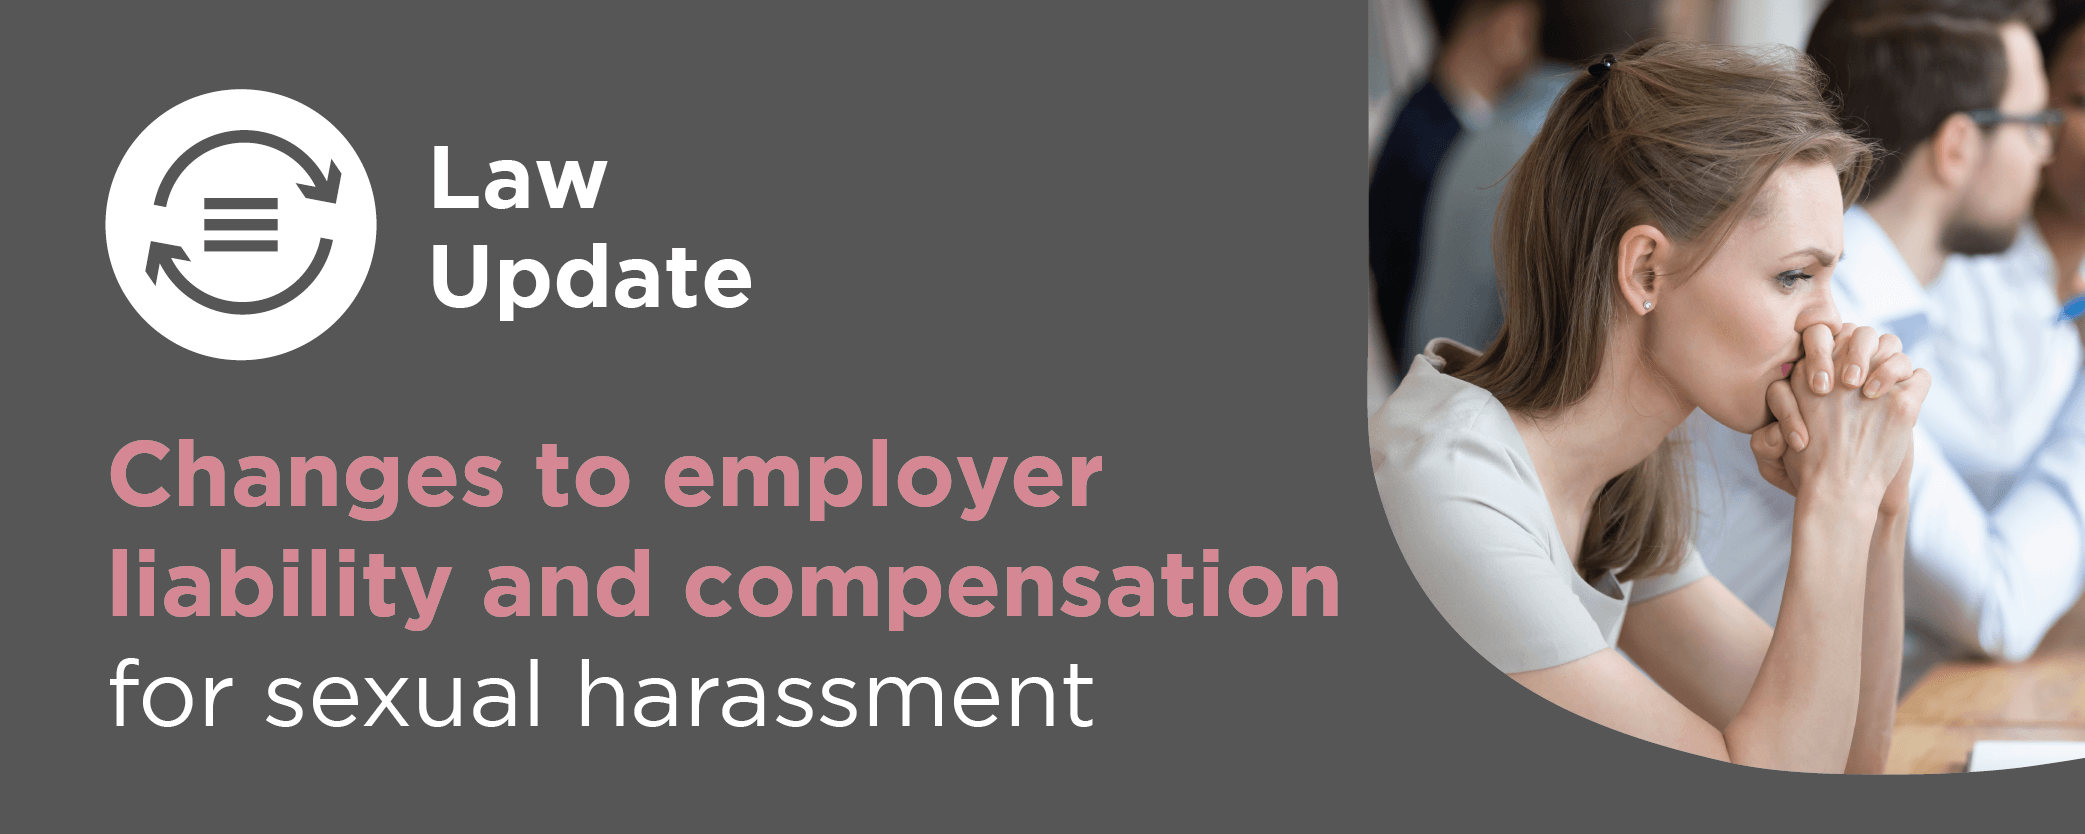 Changes to employer liability and compensation for sexual harassment